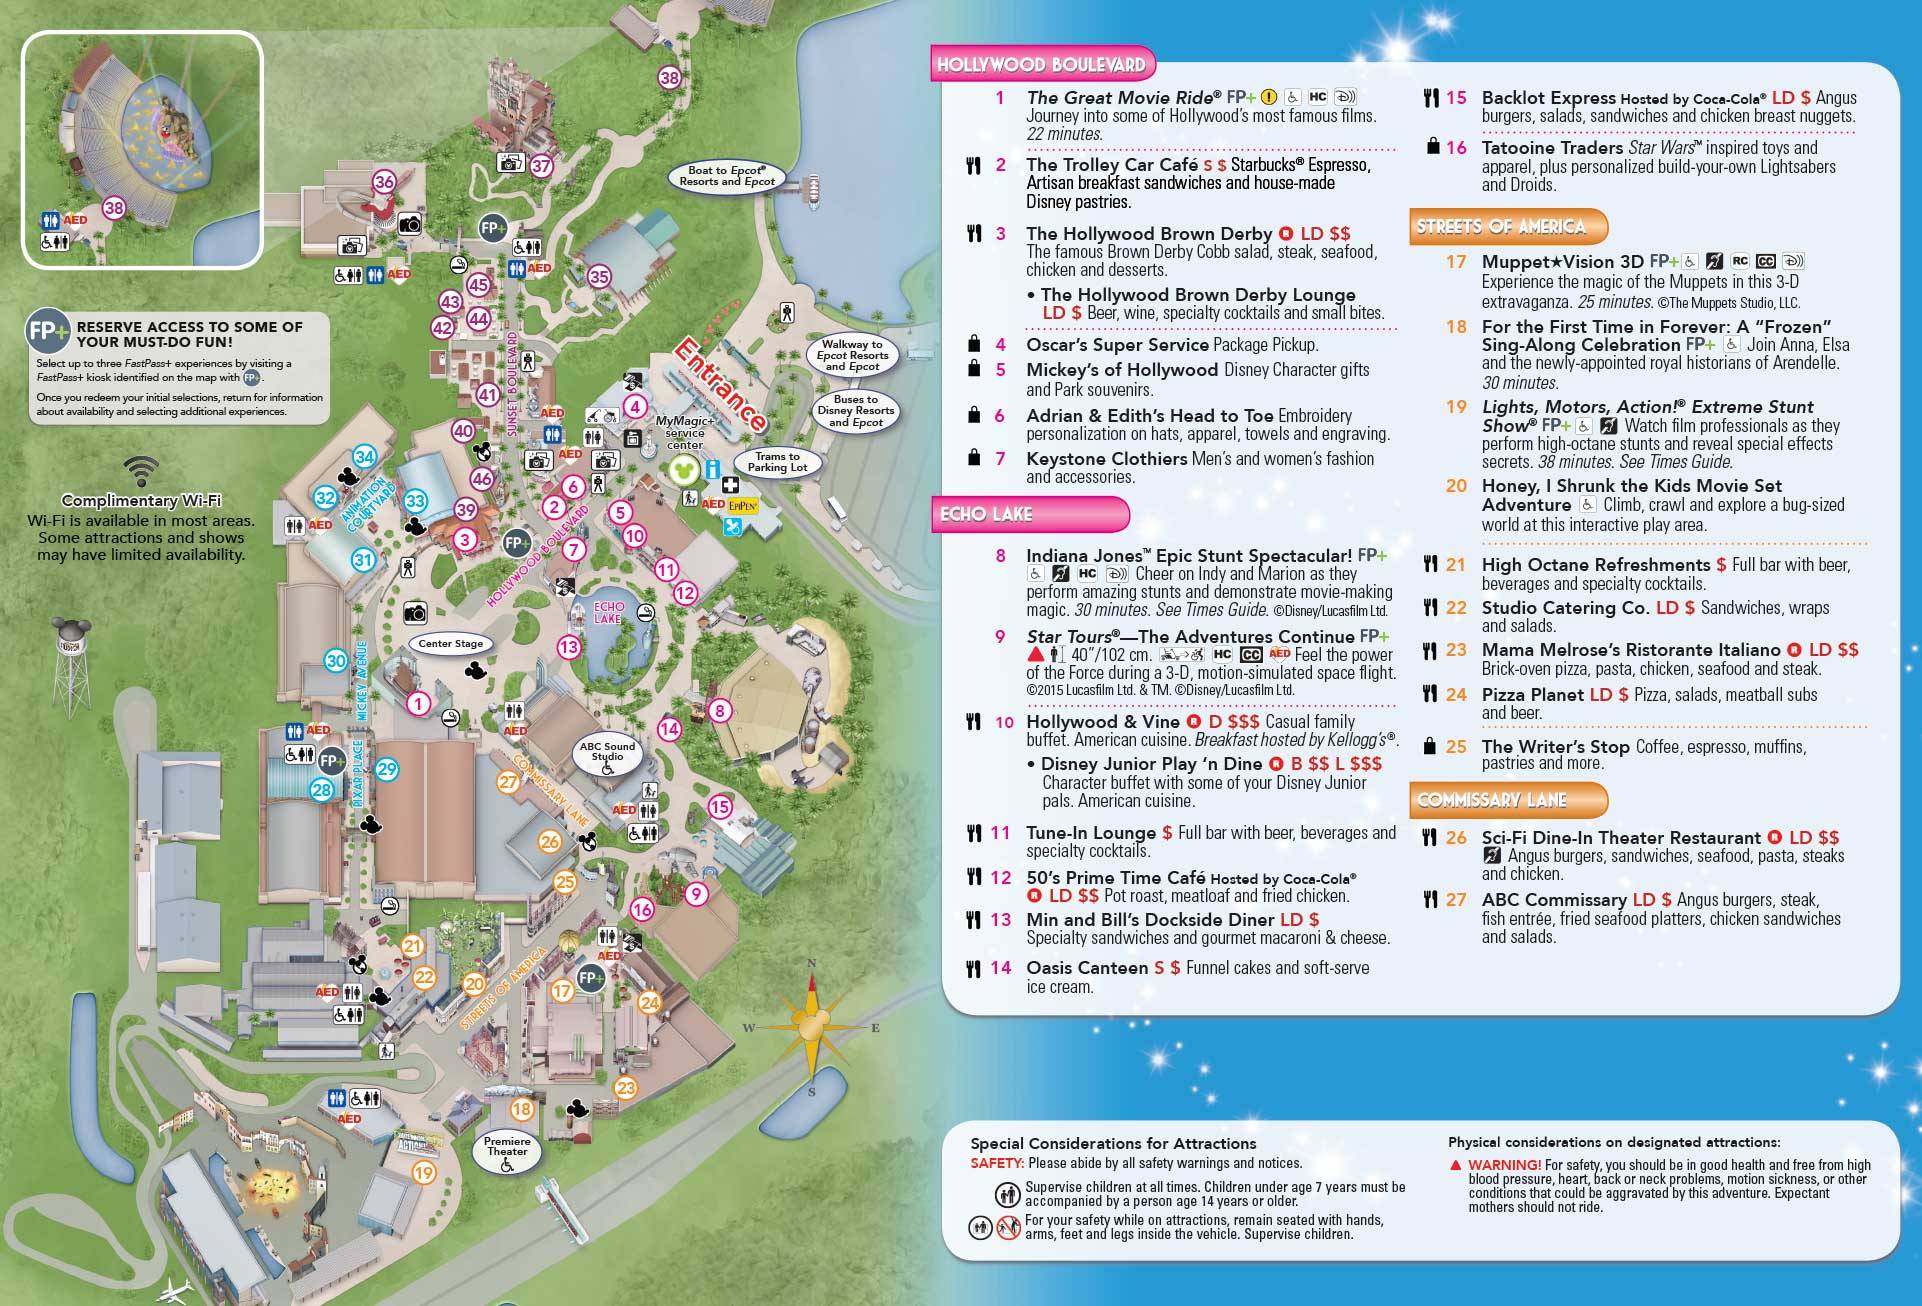 March 2015 Studios guide map